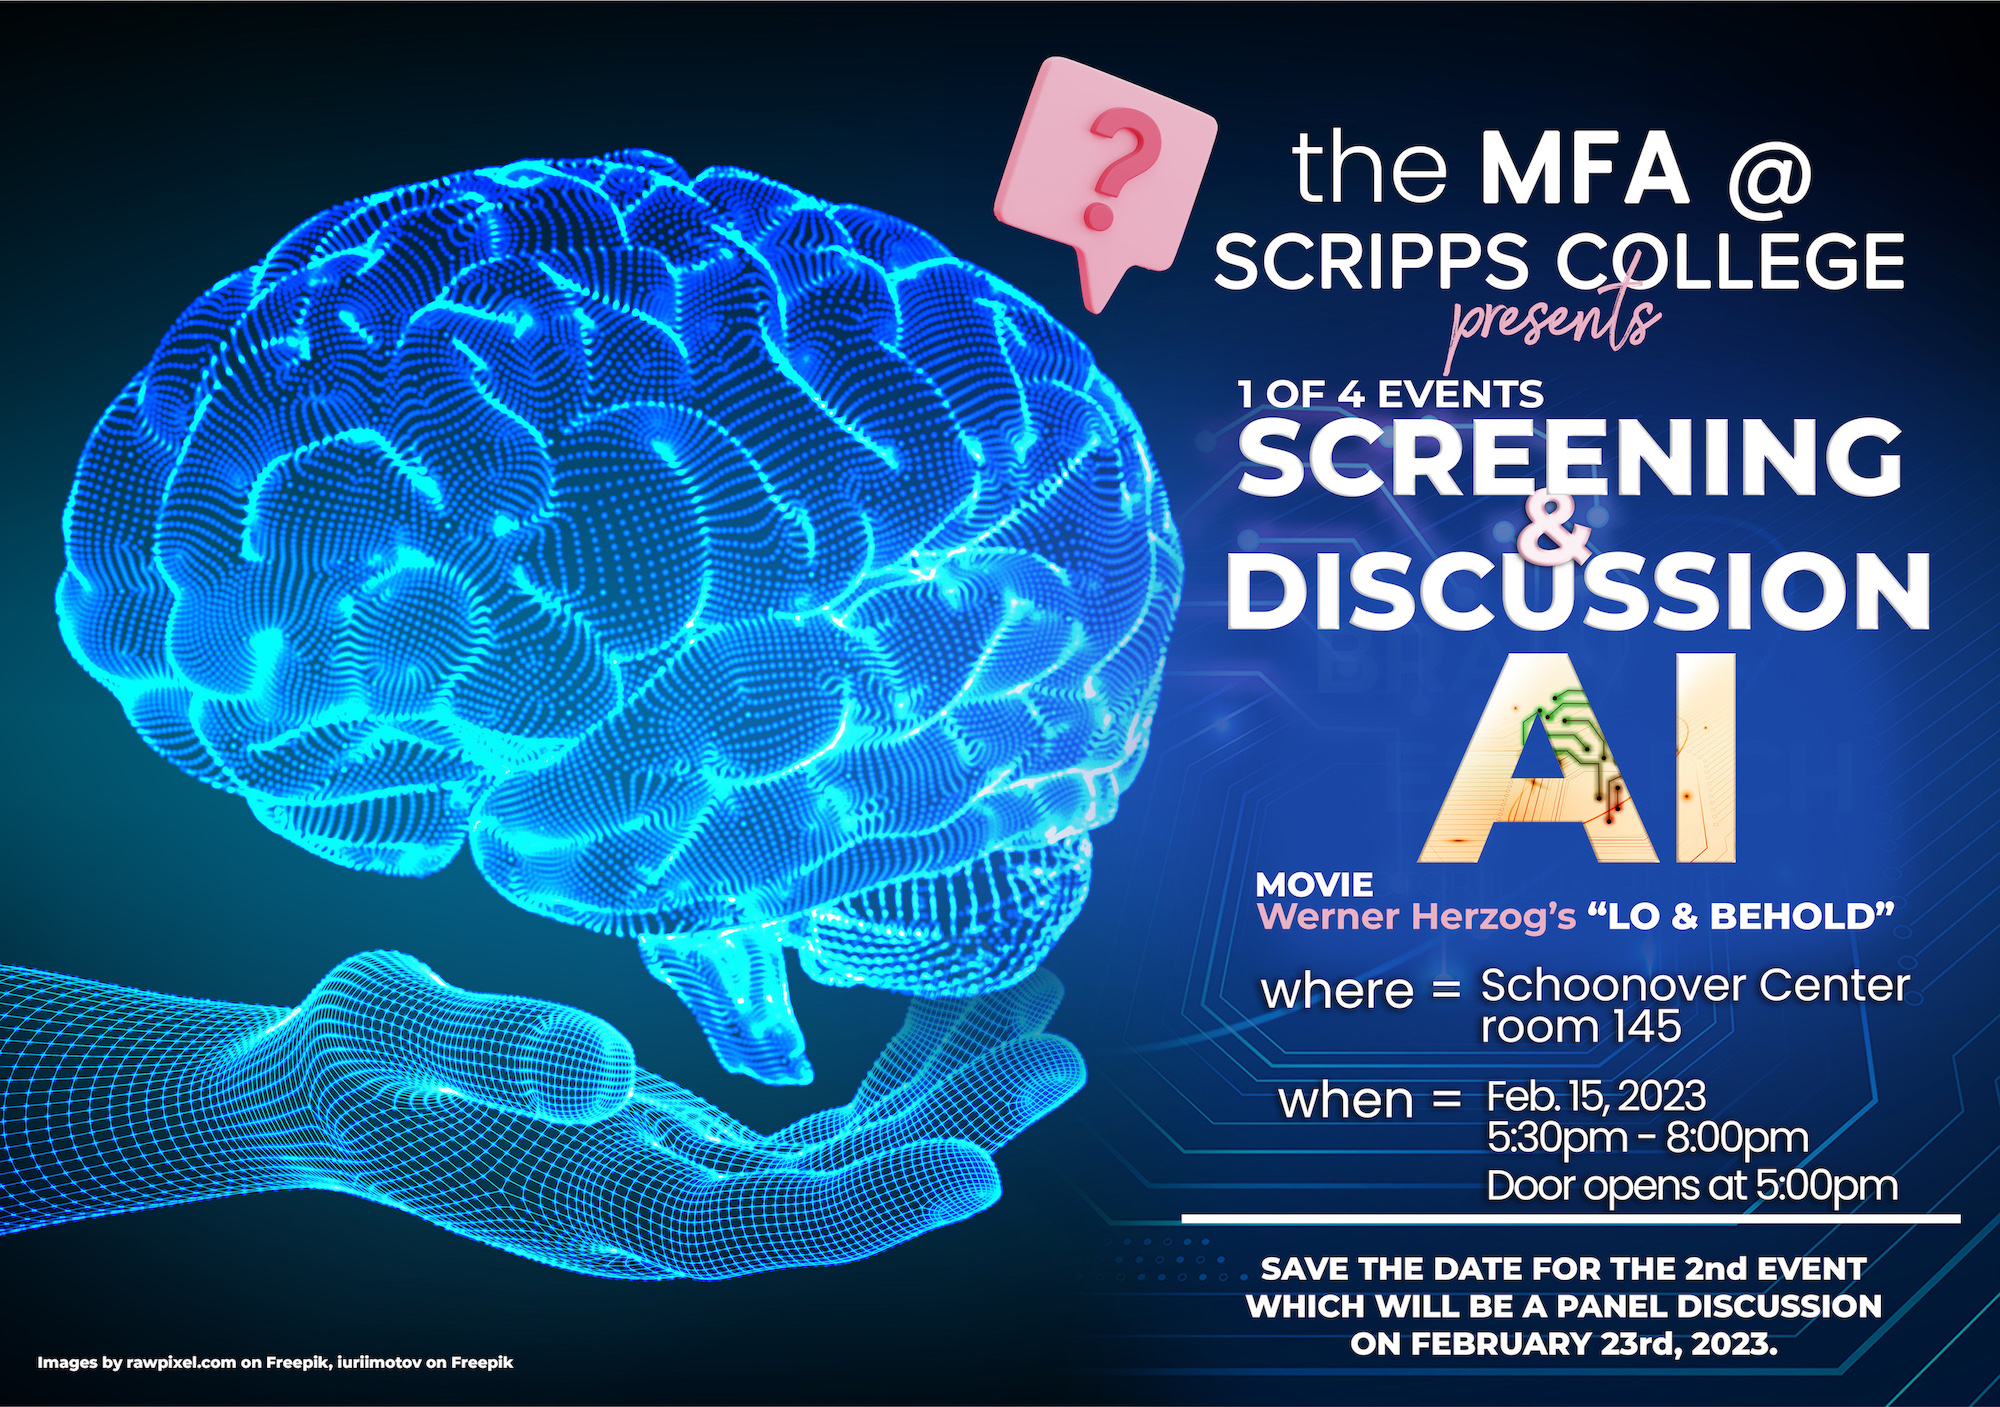 A flyer with an image of a brain on it, reading: the MFA @ Scripps College presents 1 of 4 events Screening and discussion AI movie - Werner Herzog’s “lo and behold” where - Schooner center room 145, when - Feb. 15 5:30pm to 8pm.